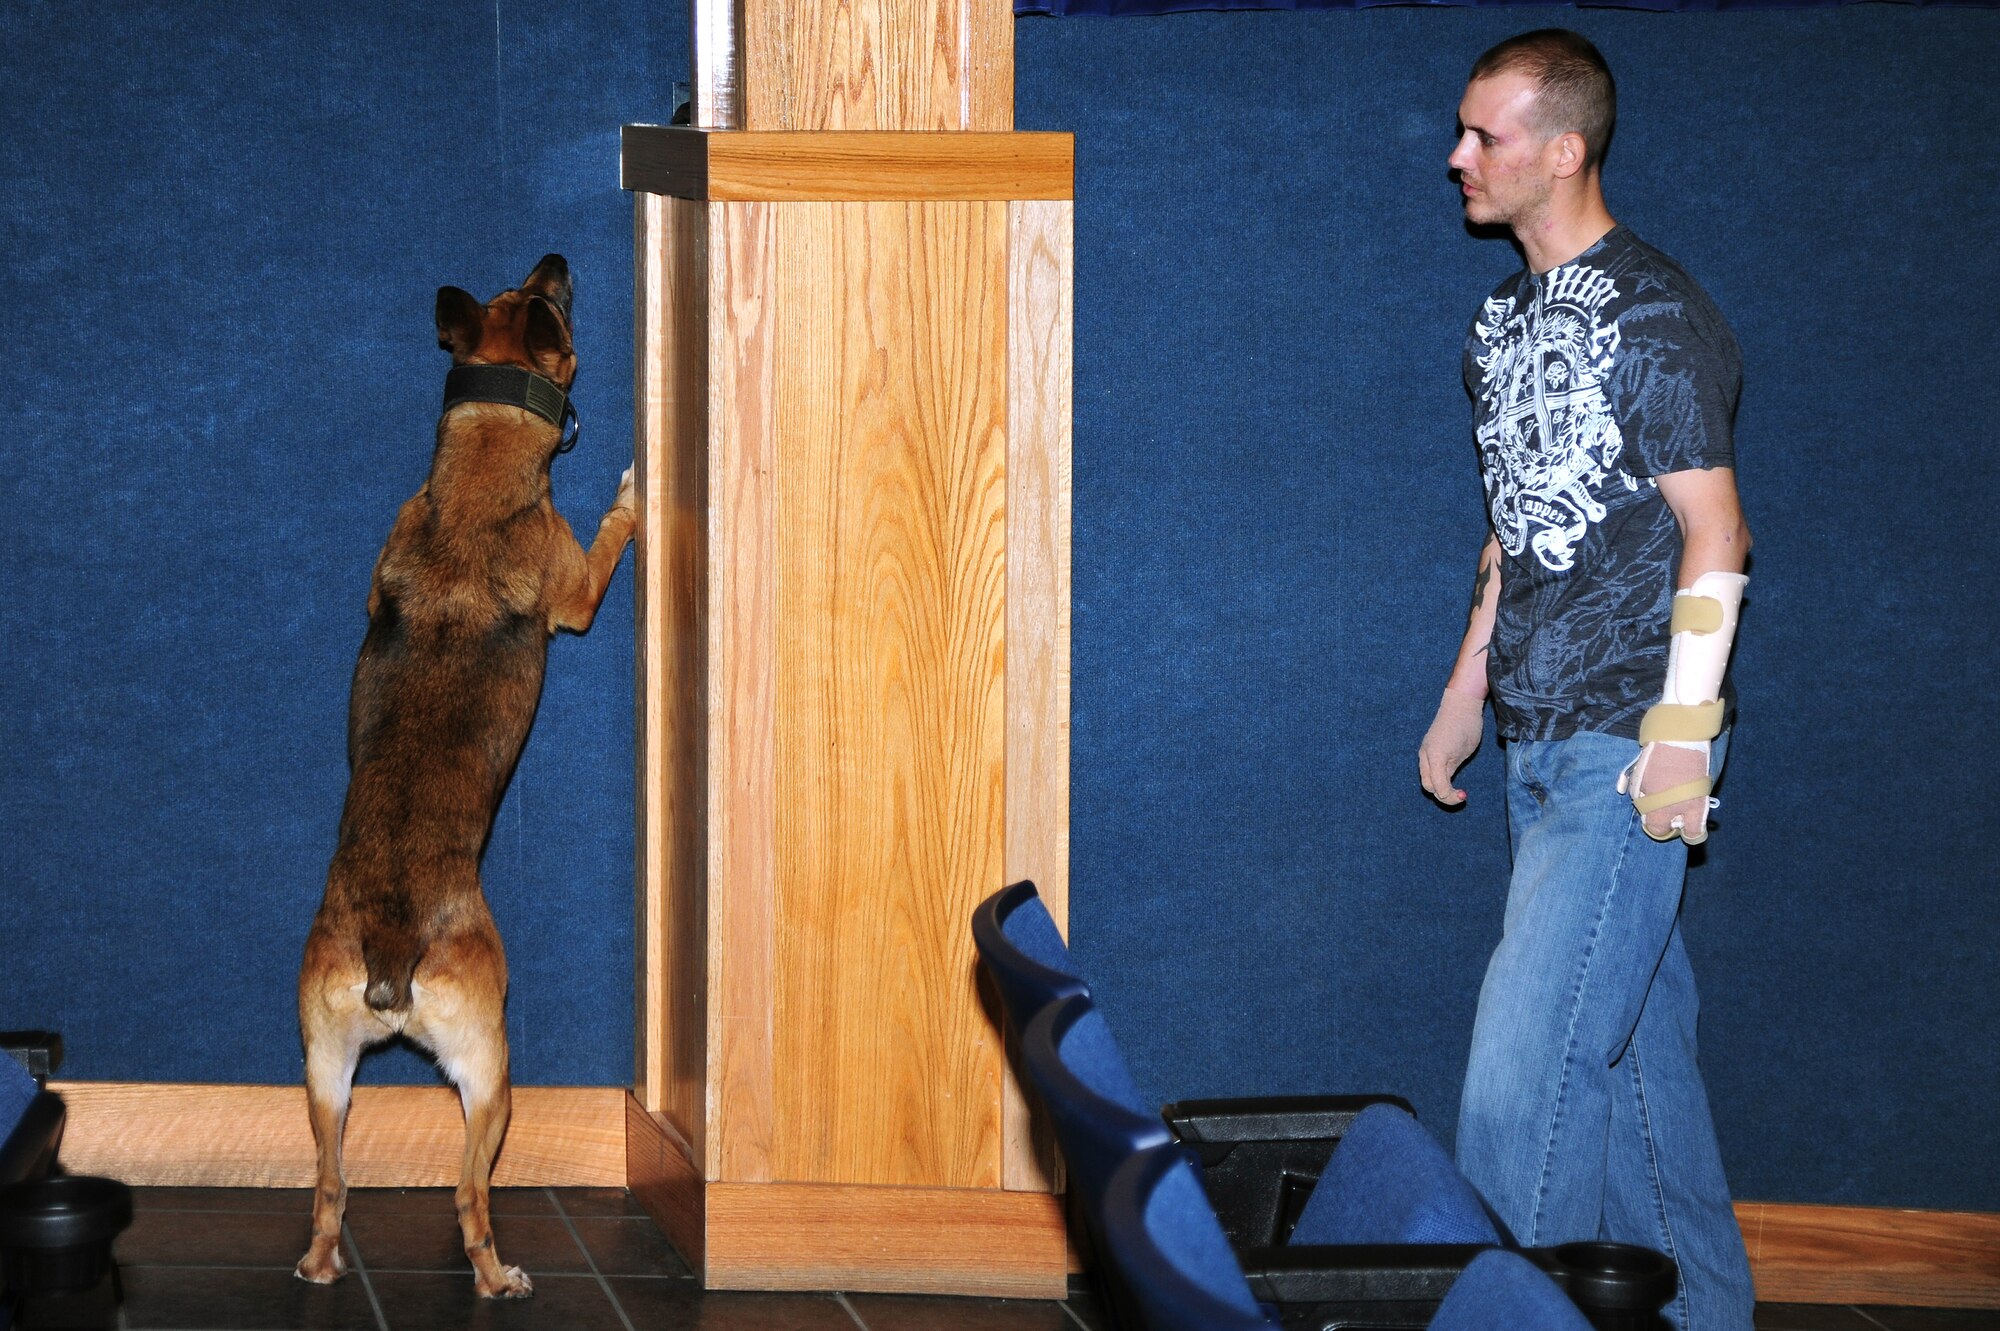 Staff Sgt. Leonard Anderson, 59th Patient Squadron, Lackland Air Force Base, Texas, conducts detection training with Azza, 354th Security Force Squadron military working dog, at the base theater Oct. 17, 2012, Eielson Air Force Base, Alaska. Anderson, a former 354th SFS MWD handler, returned to Eielson where he was reunited with Azza after months of recovery following an attack during his deployment to Afghanistan. (U.S. Air Force photo/Airman 1st Class Zachary Perras)